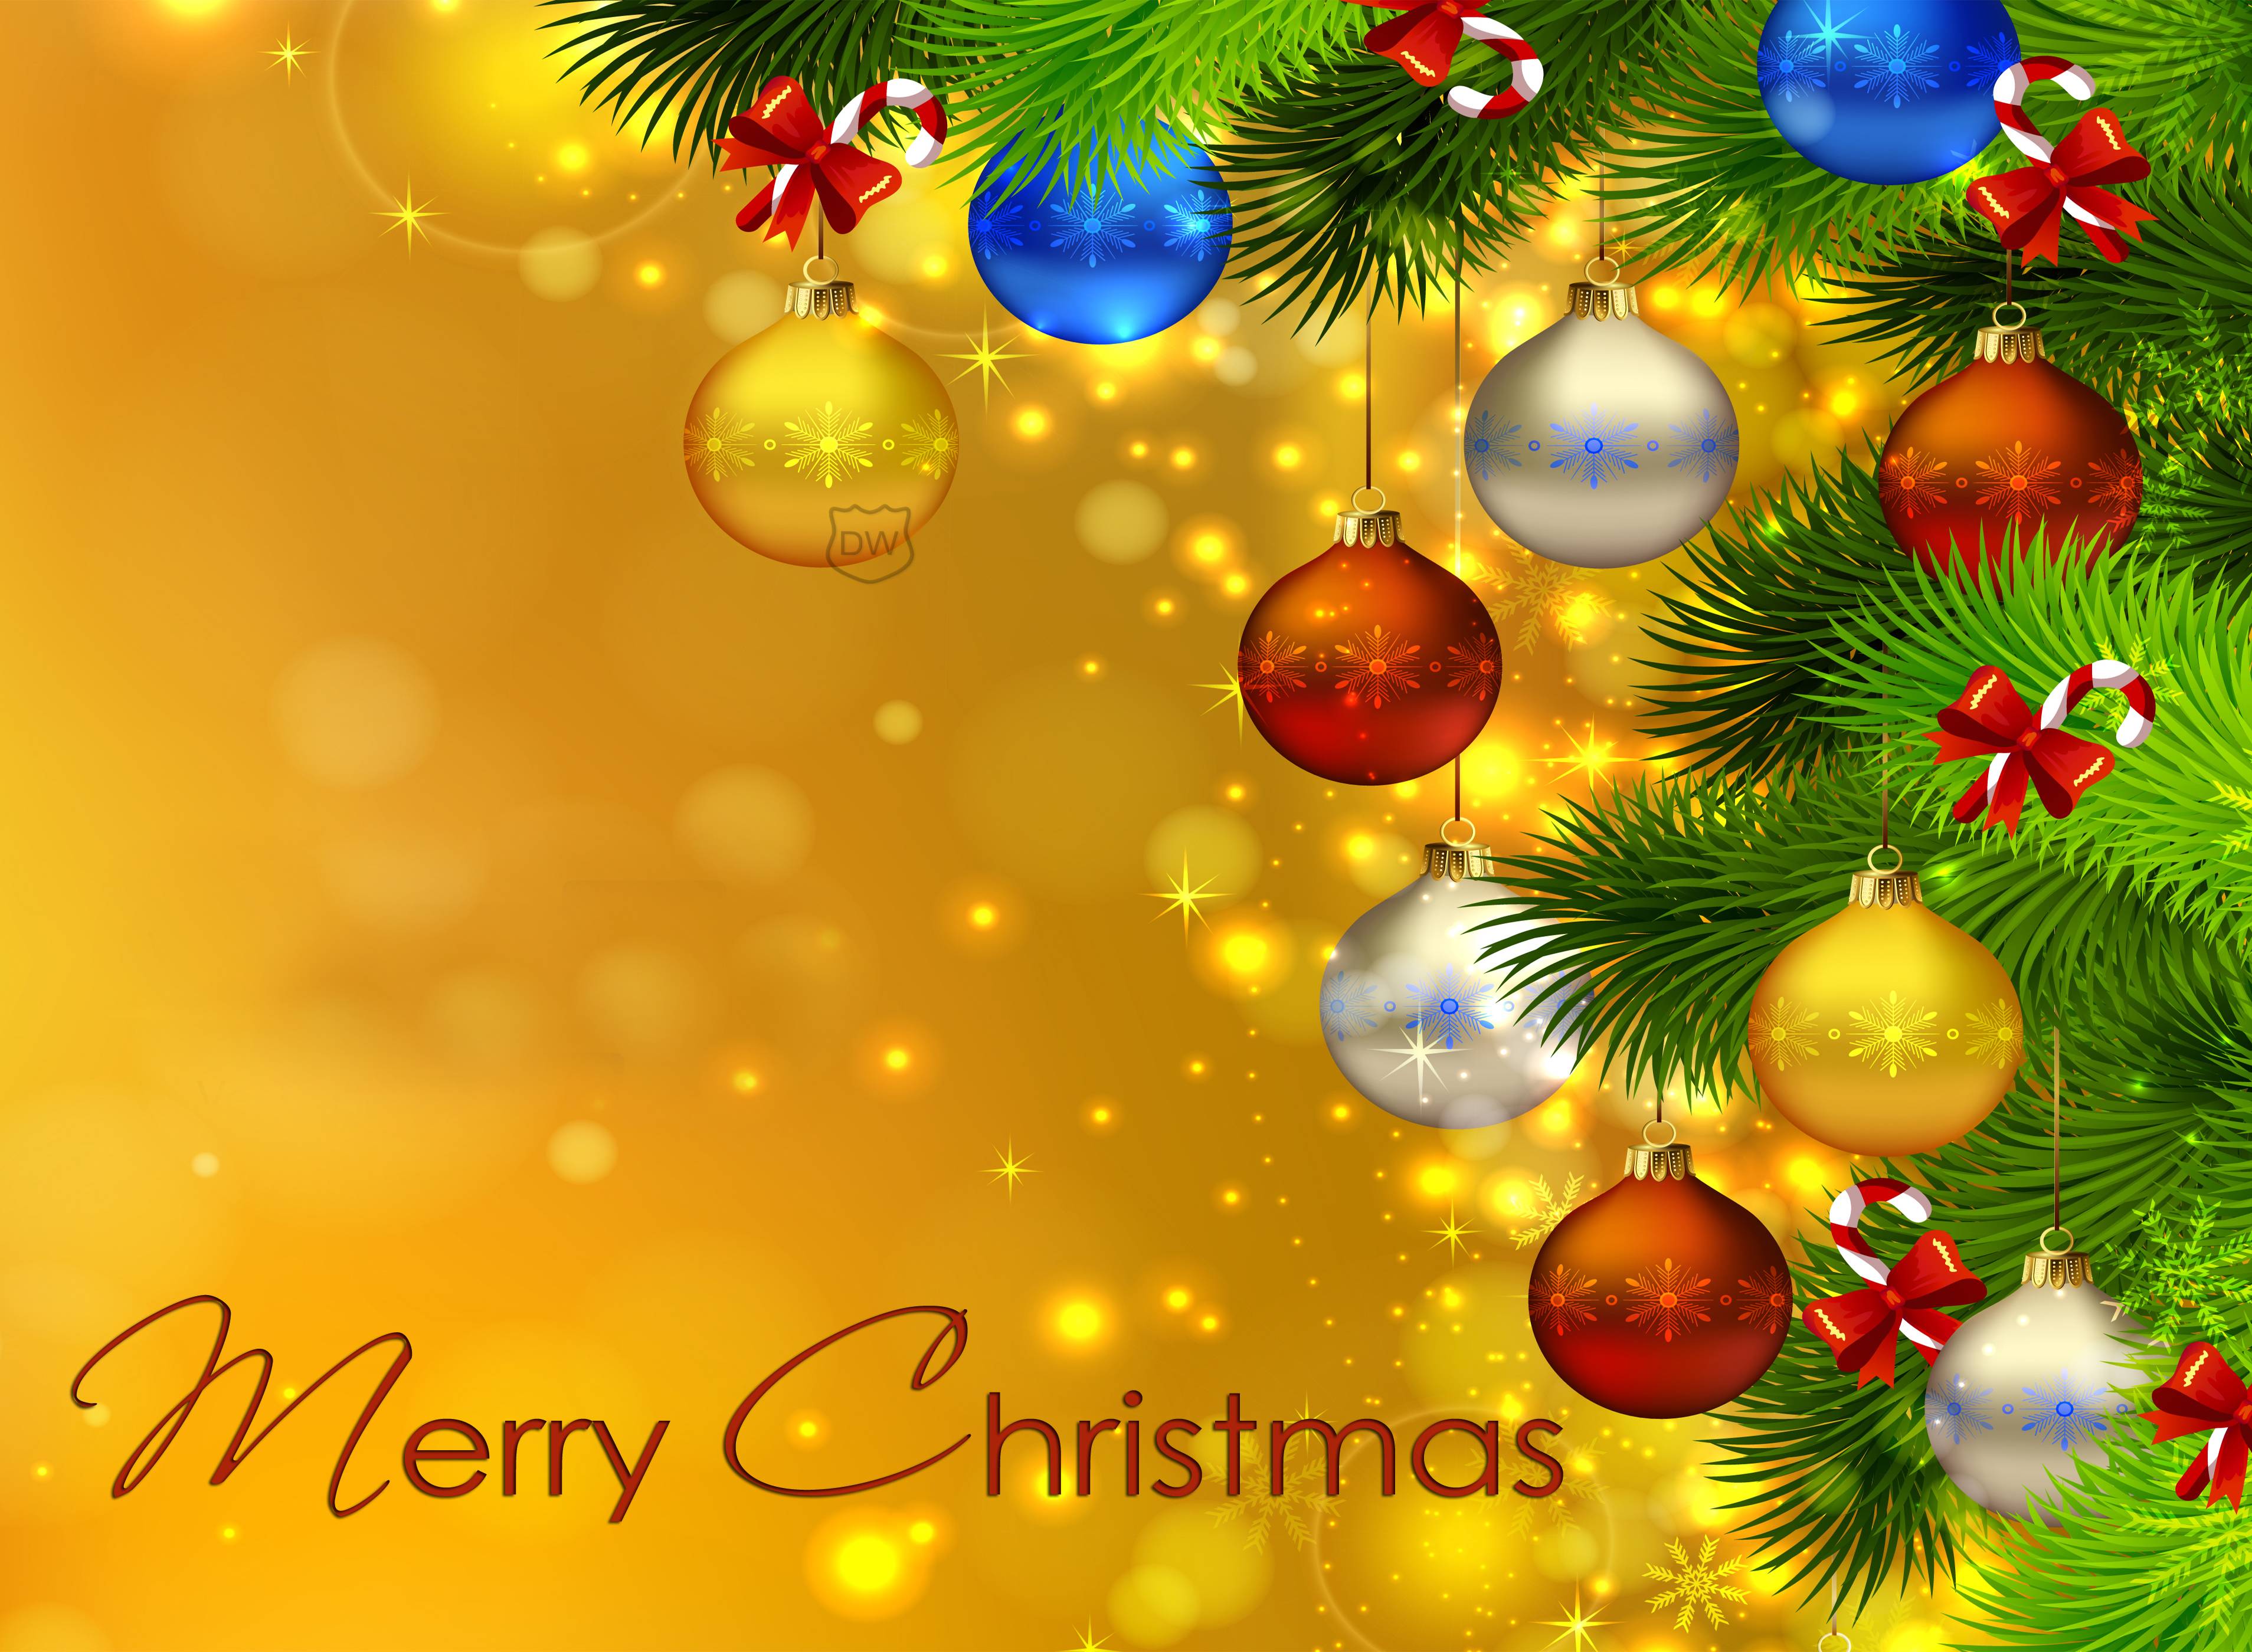 Get in the holiday mood with Christmas background HD images free ...